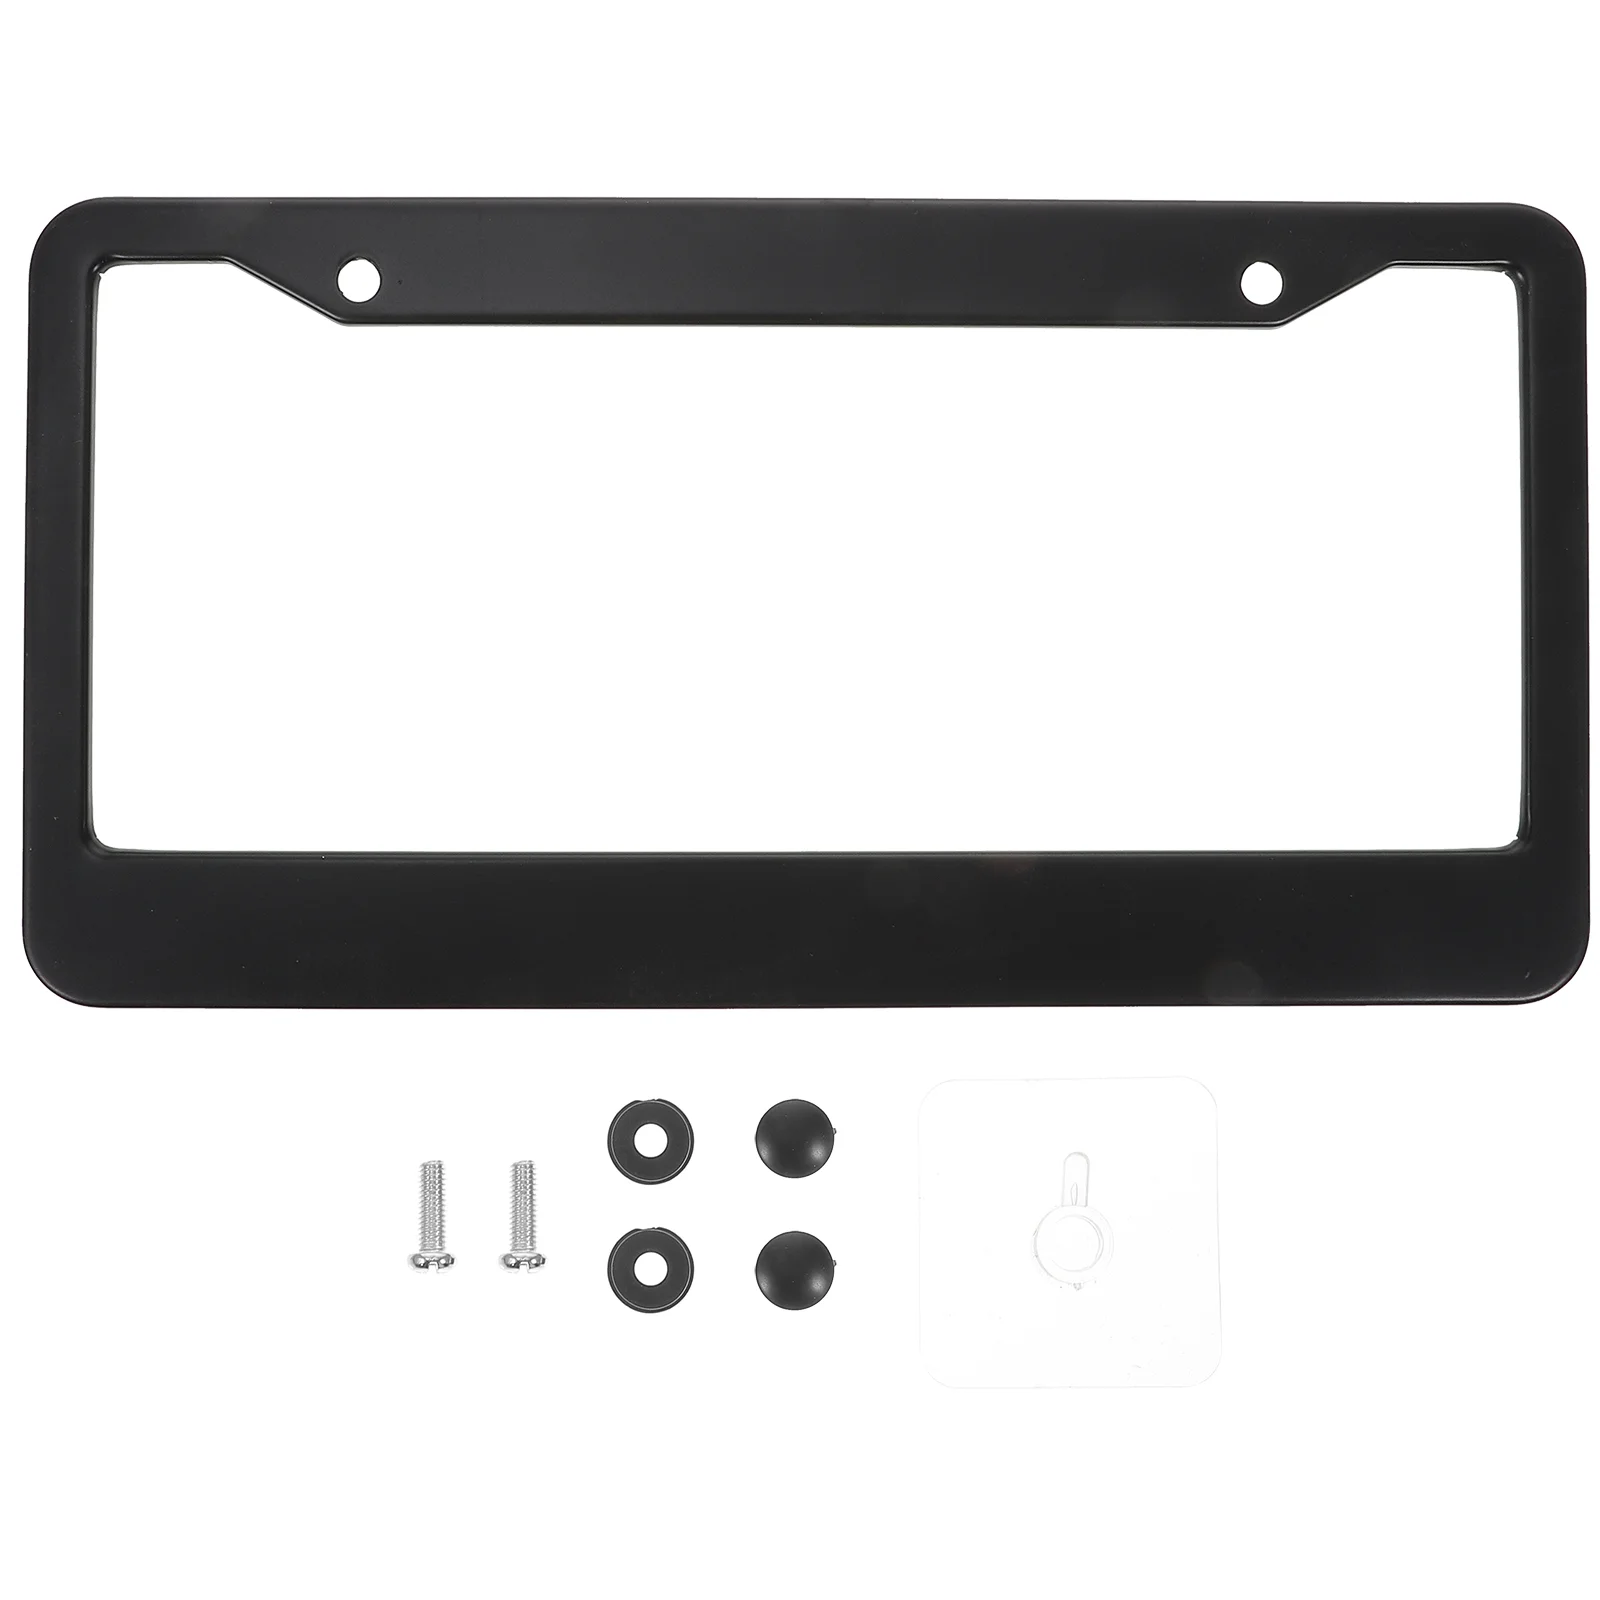 

Regular Car License Frame Plate Cover Frames American Style Licenses Covers Holders Shield Stainless Steel Fashion